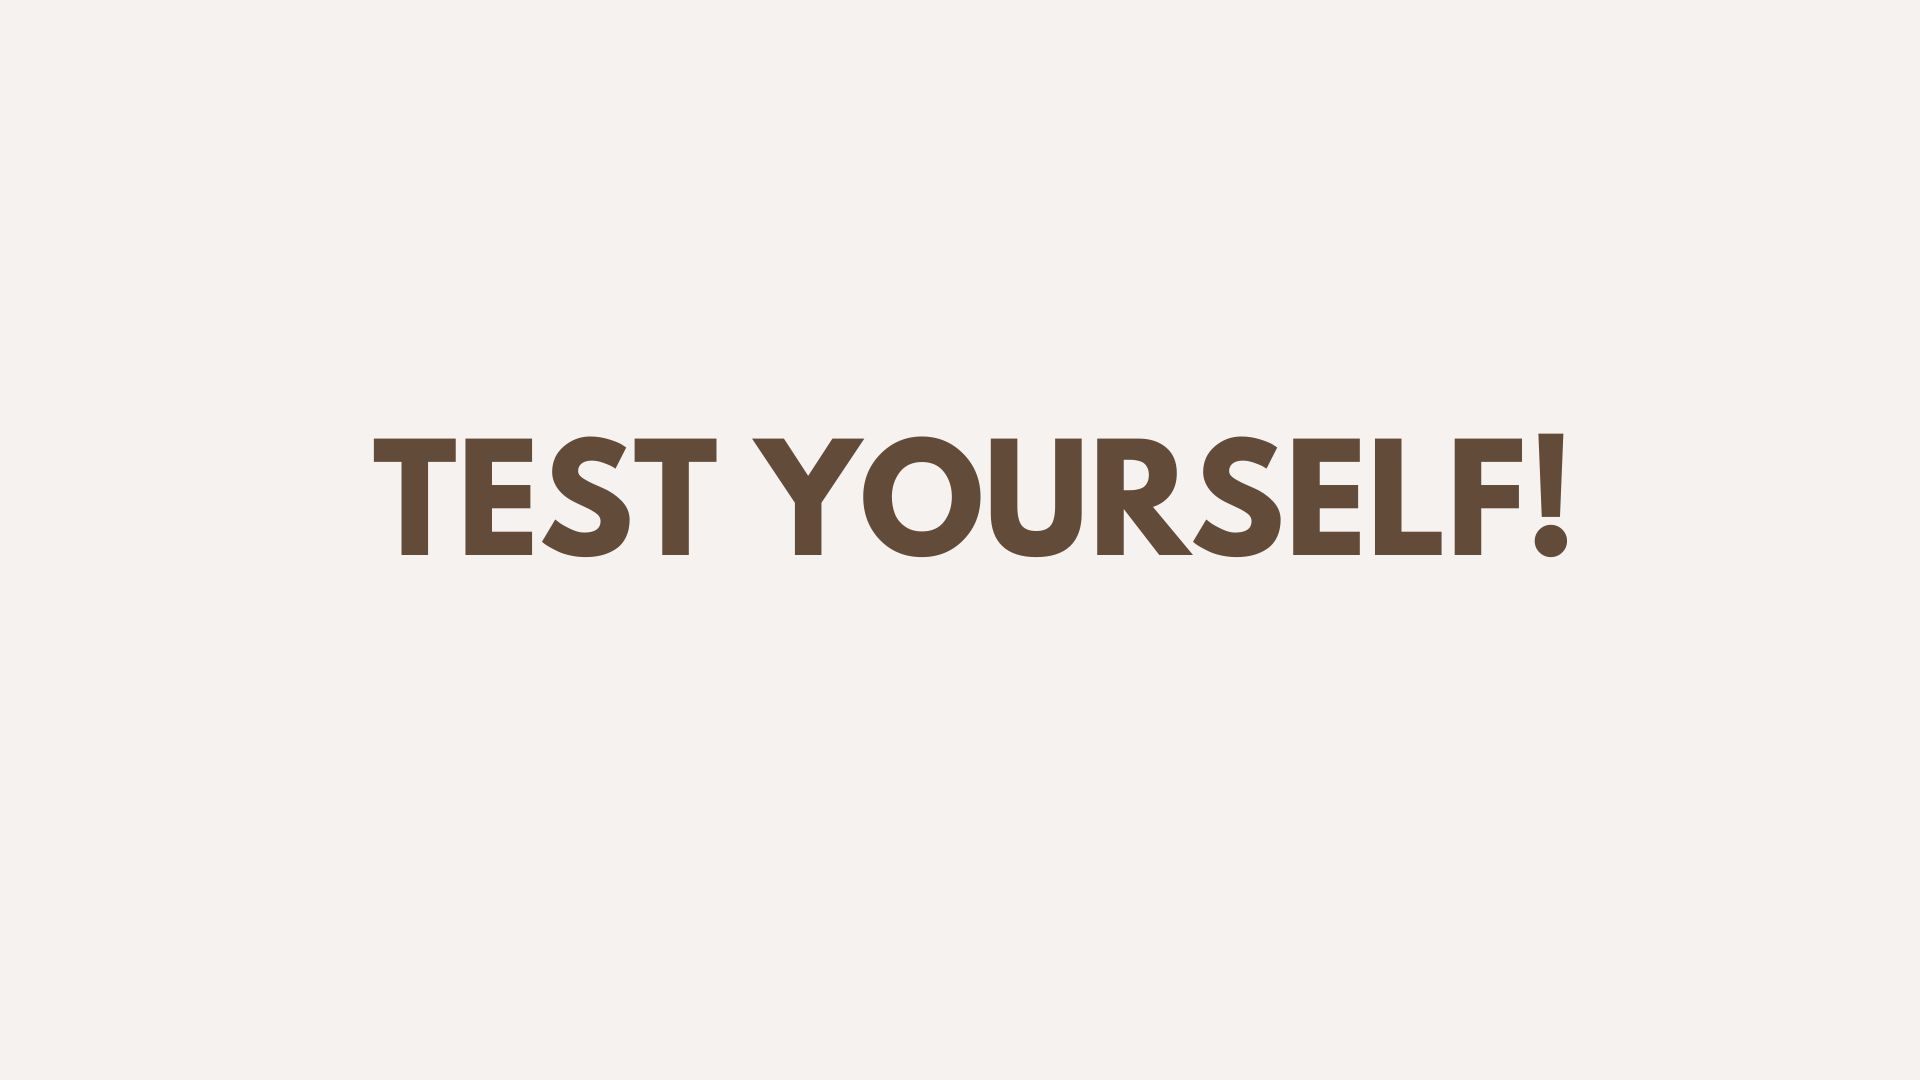 TEST YOURSELF! Course - 4